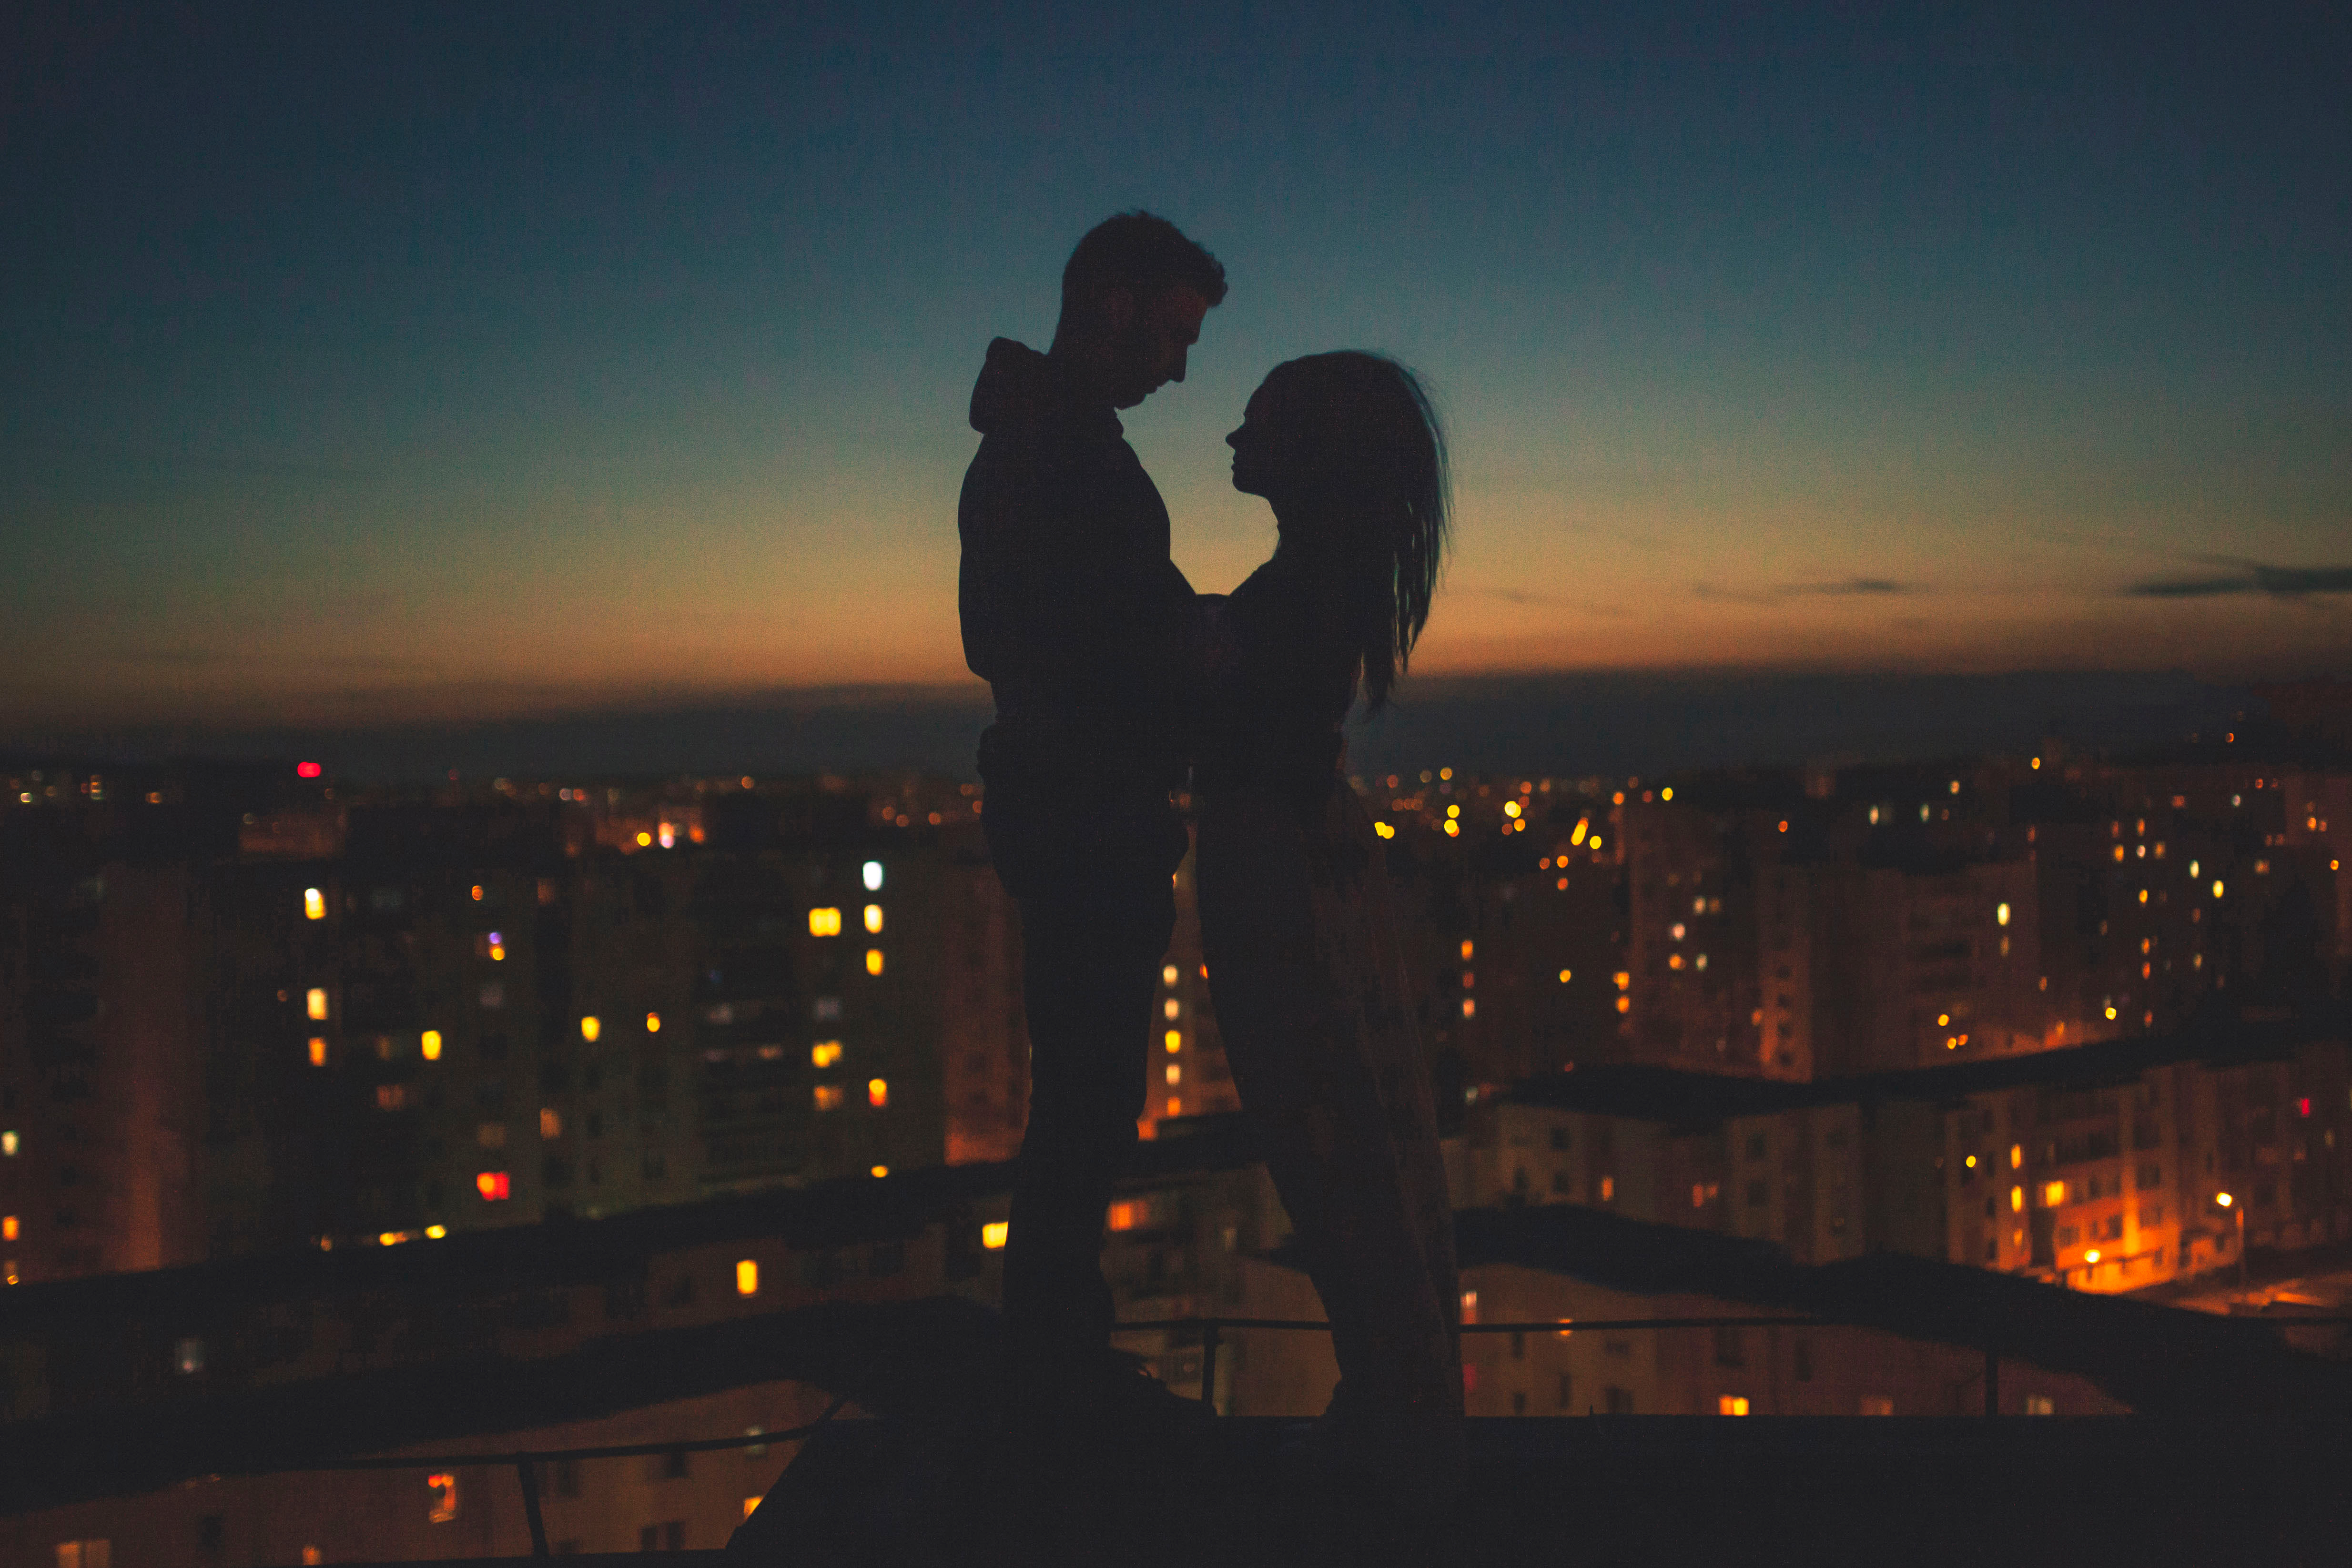 android pair, romance, couple, love, silhouettes, night city